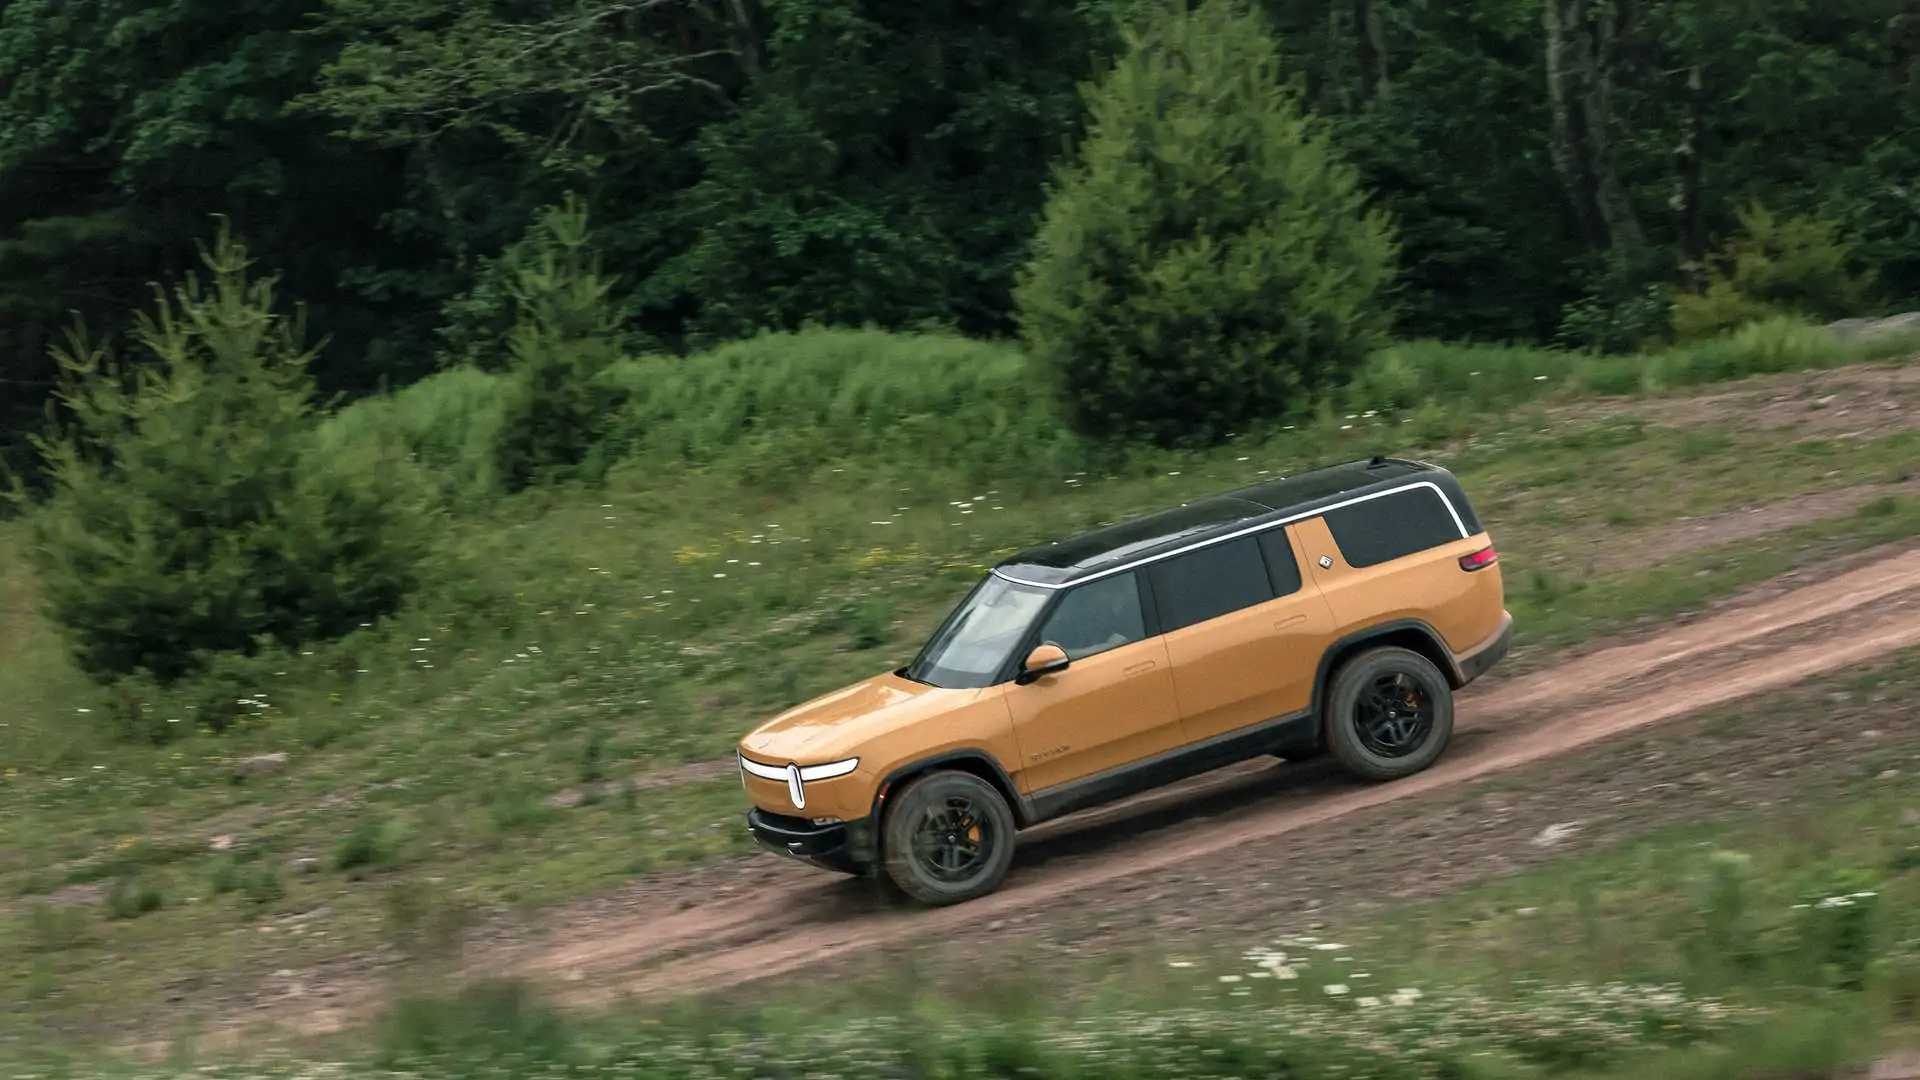 rivian prepping adaptive battery range tracking, drone mode software updates